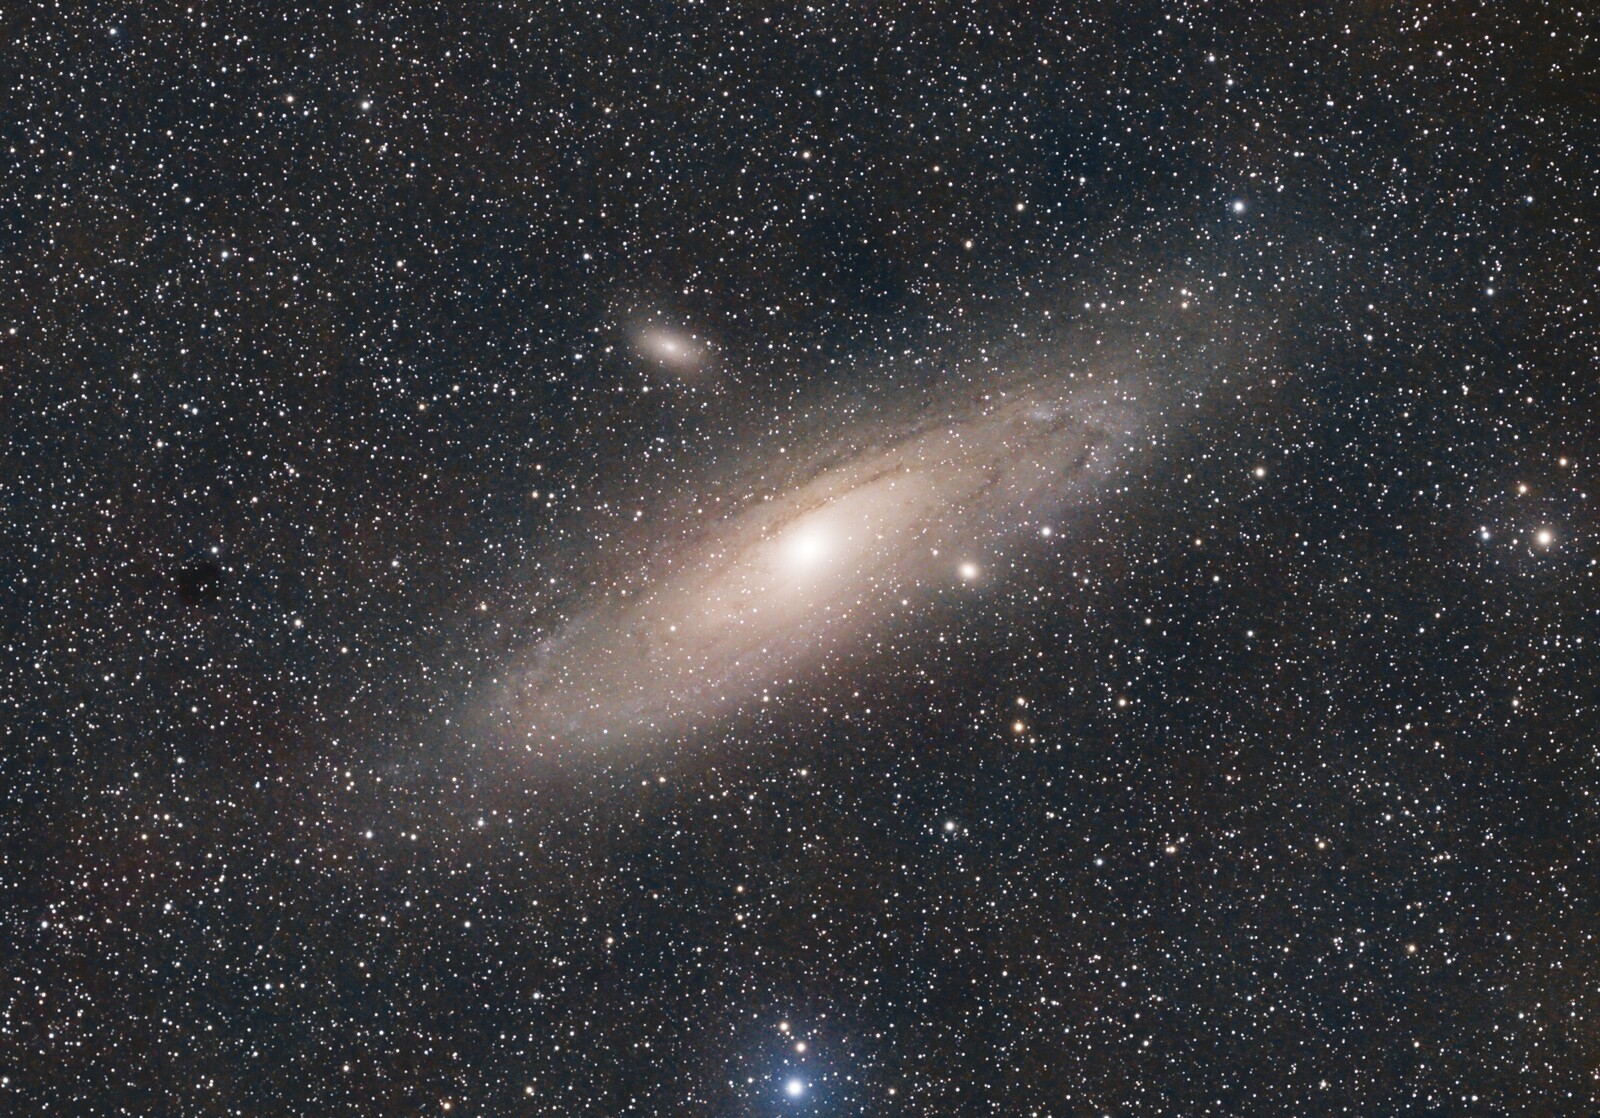 M31 from Duckman